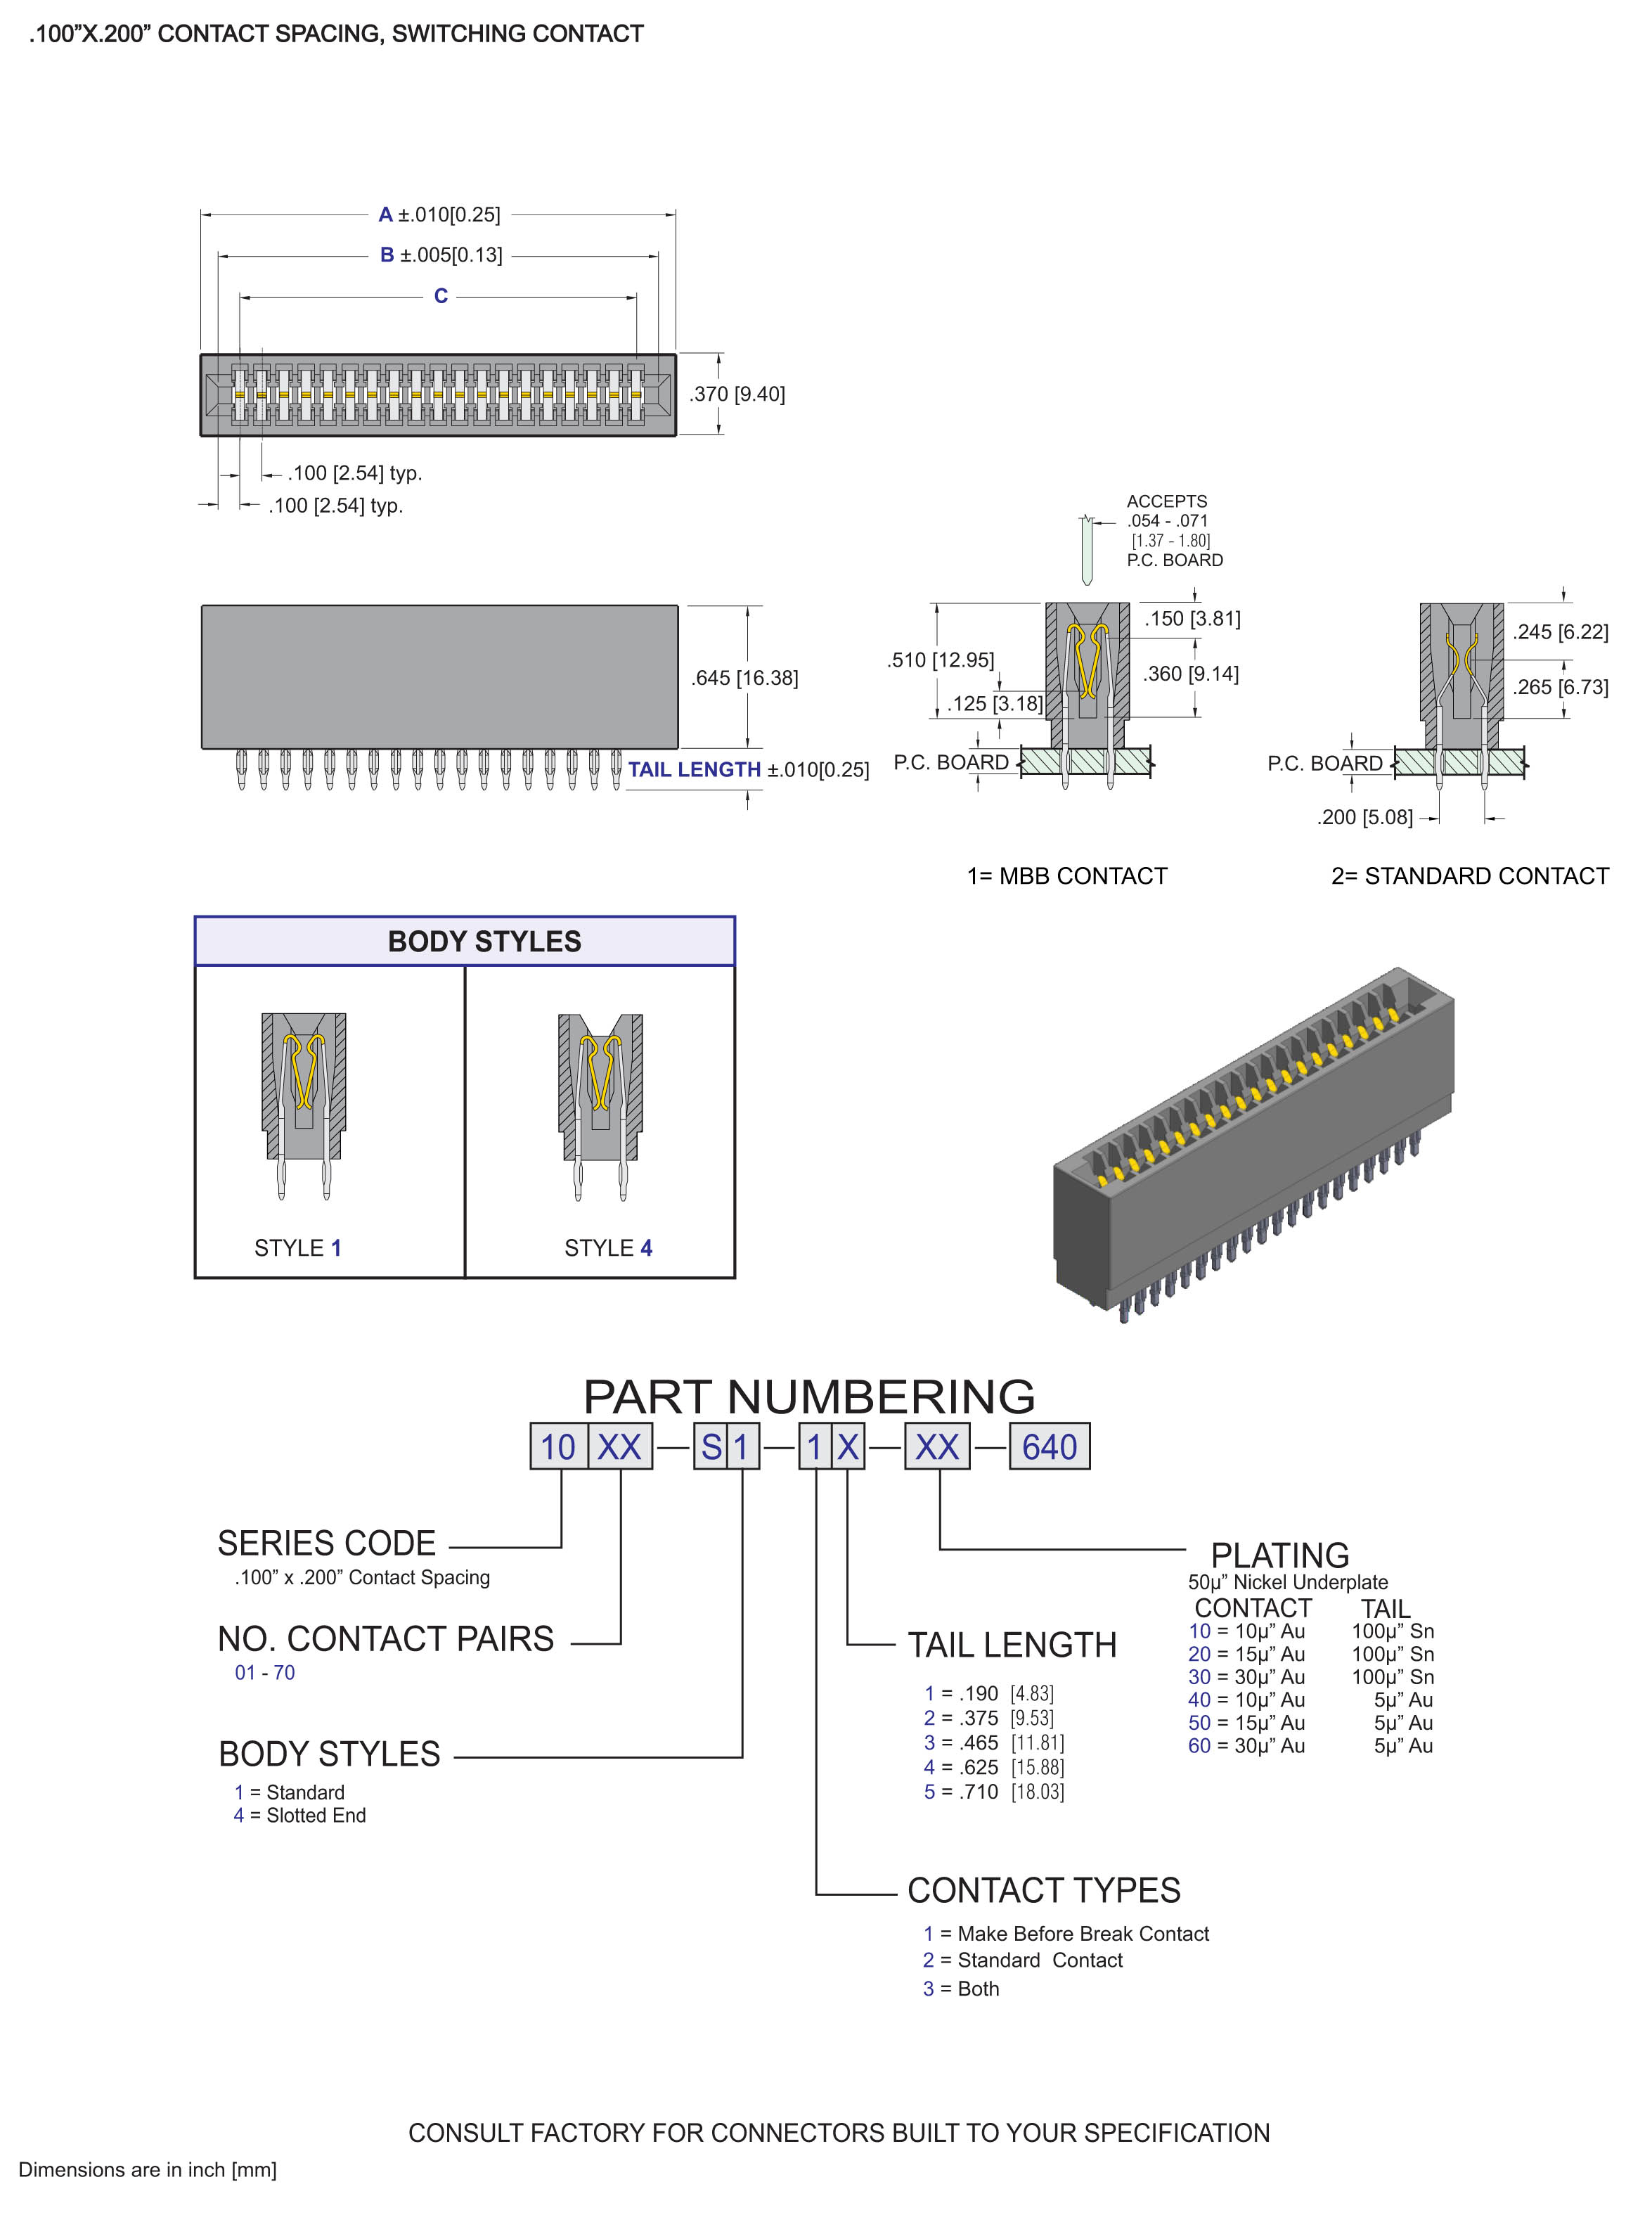 ECS 1000 Series Card Edge Connectors .100" x .200" Contact Spacing, Switching Contact